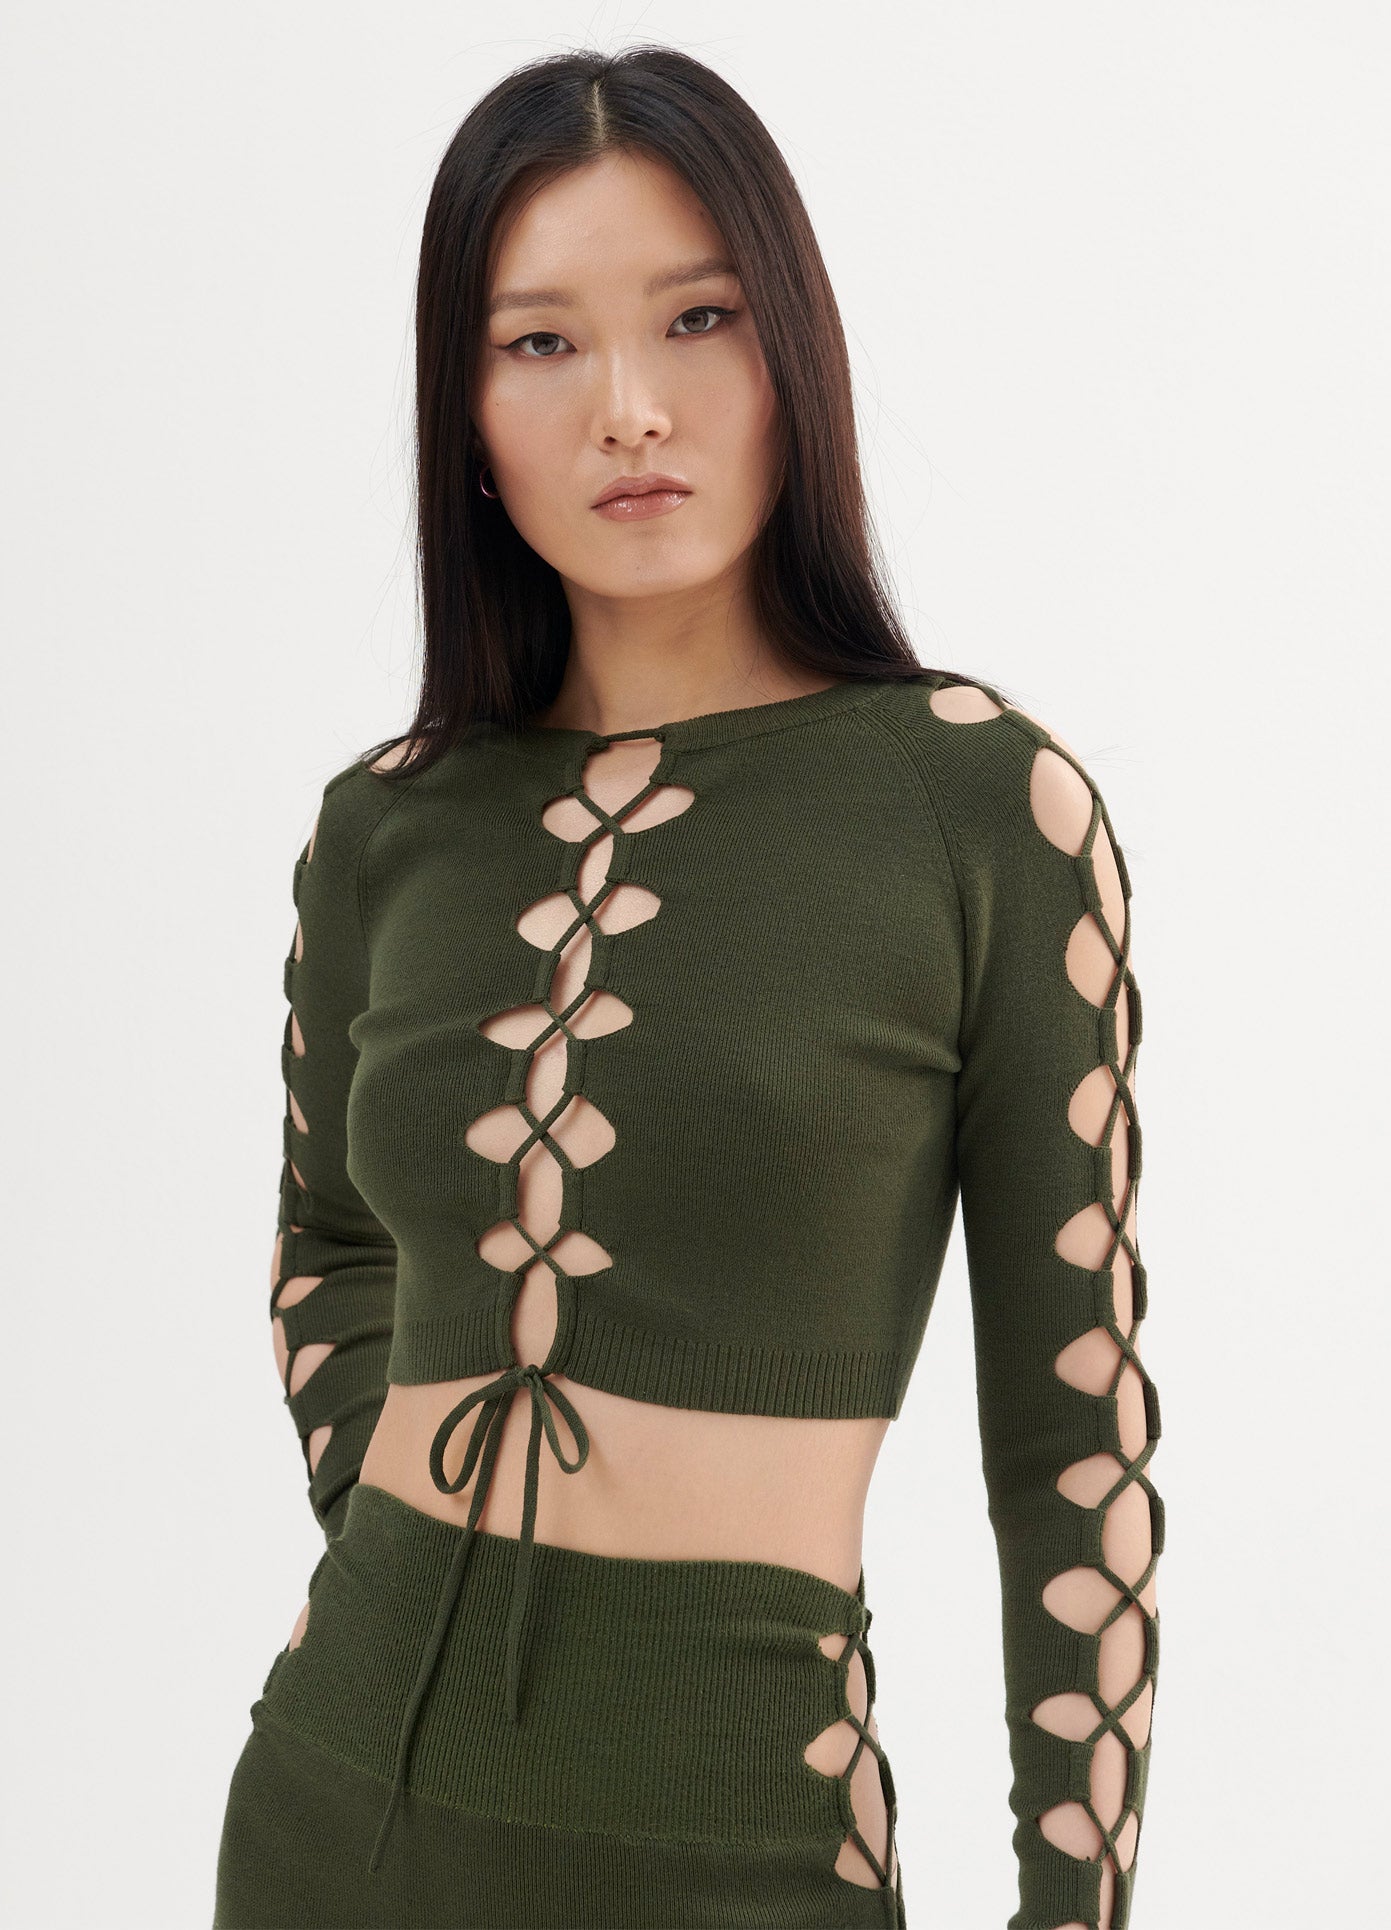 MONSE Lacing Detail Cropped Sweater in Olive on Model Front View